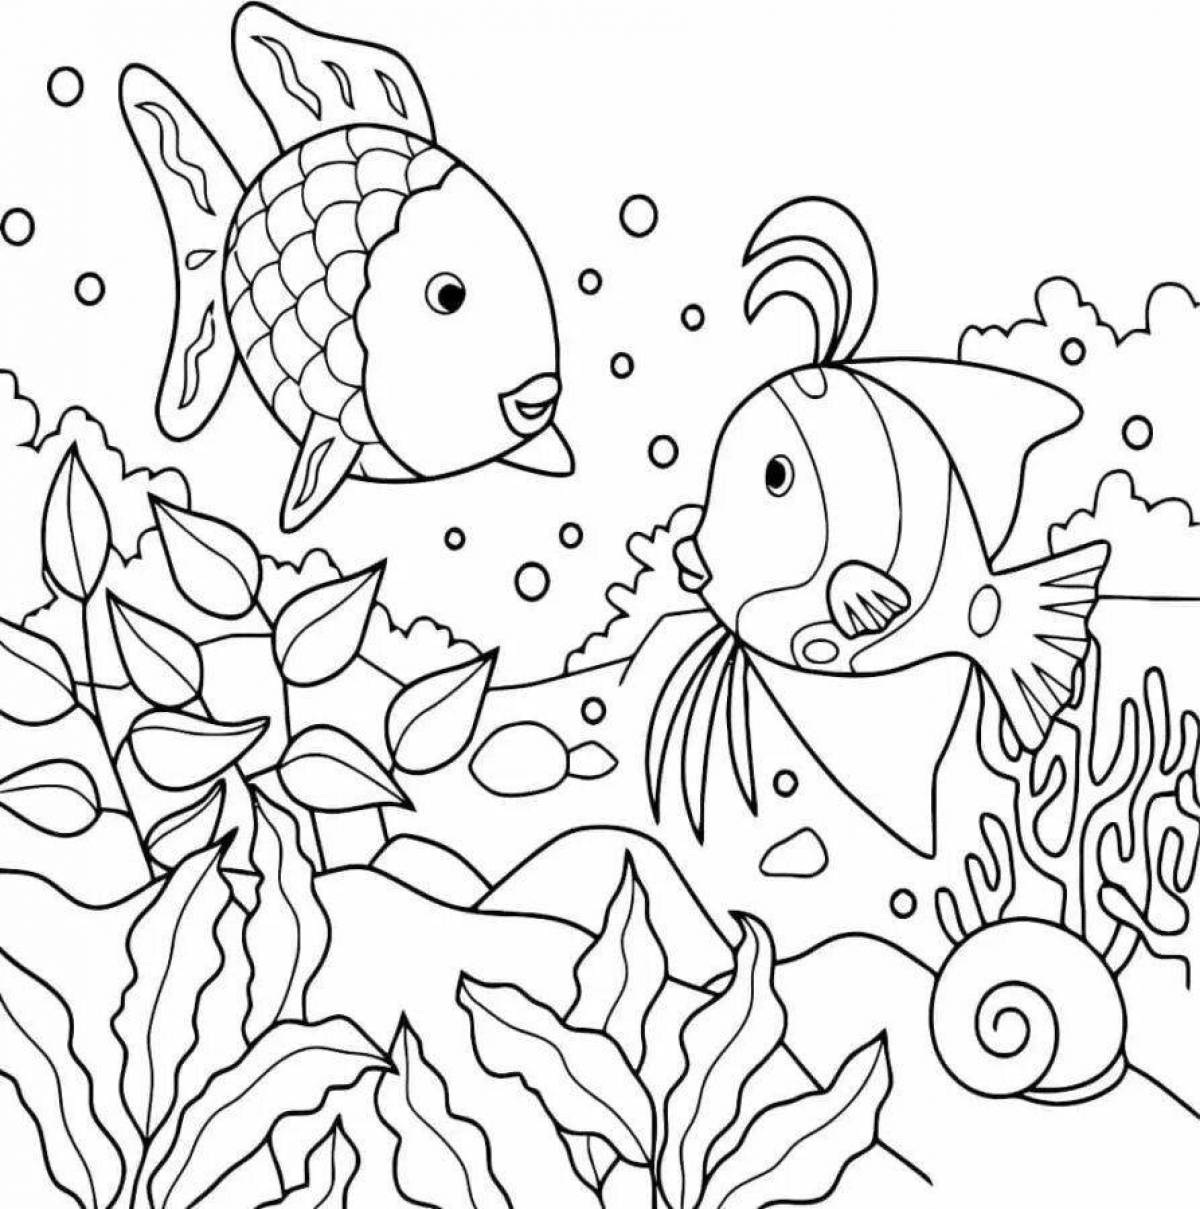 Inviting water children's world coloring book